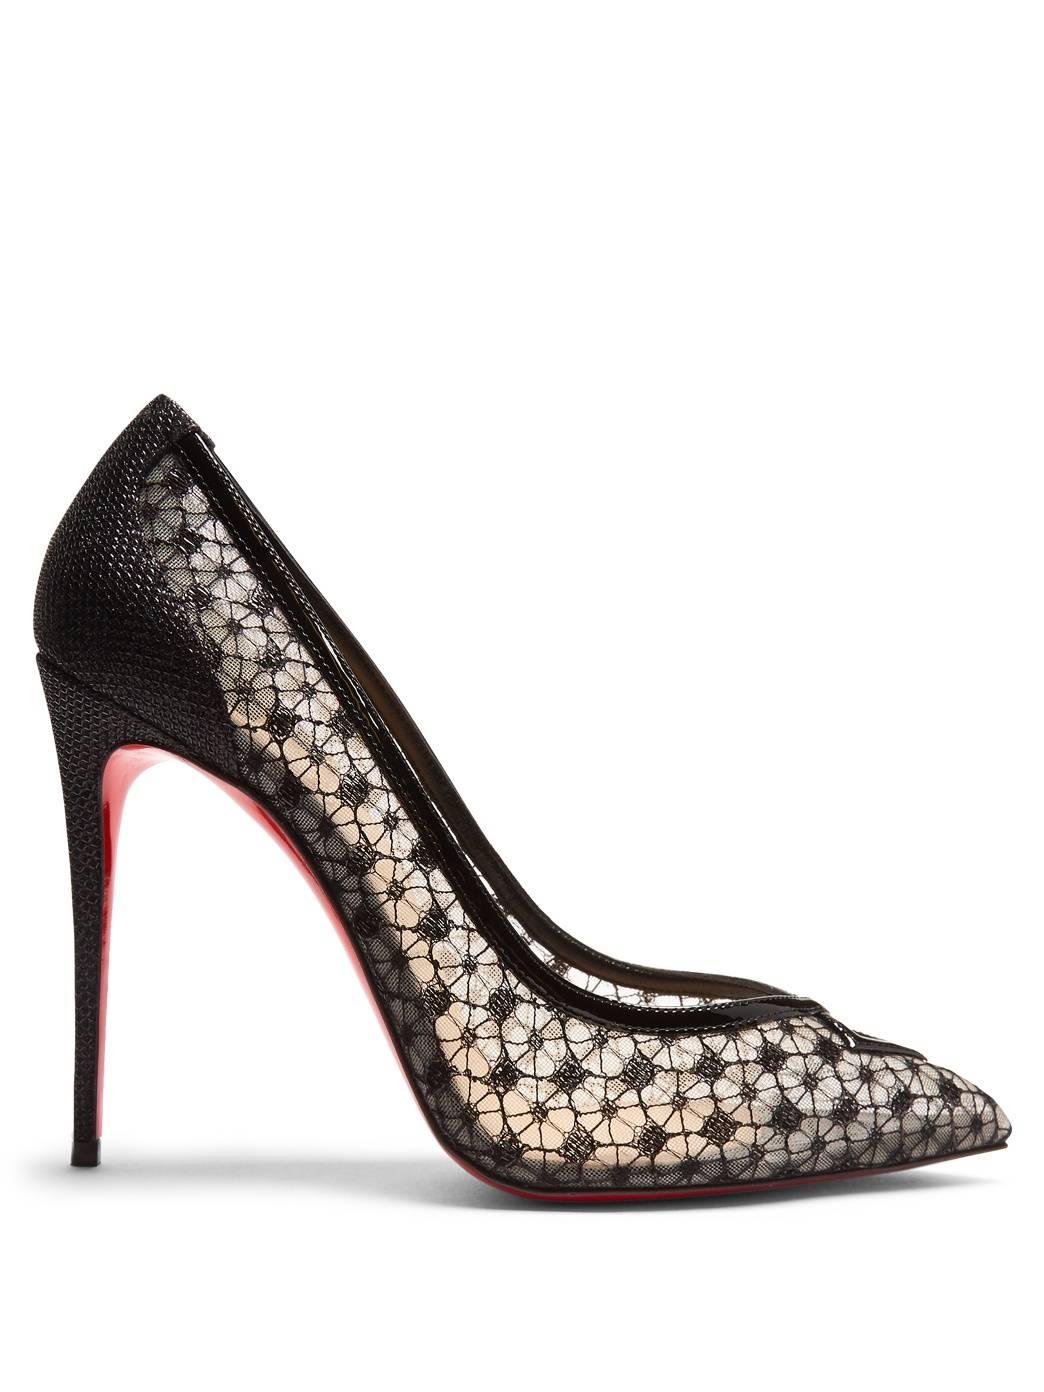 Christian Louboutin New Sold Out Black Lace Patent Heels Evening Pumps in Box 1